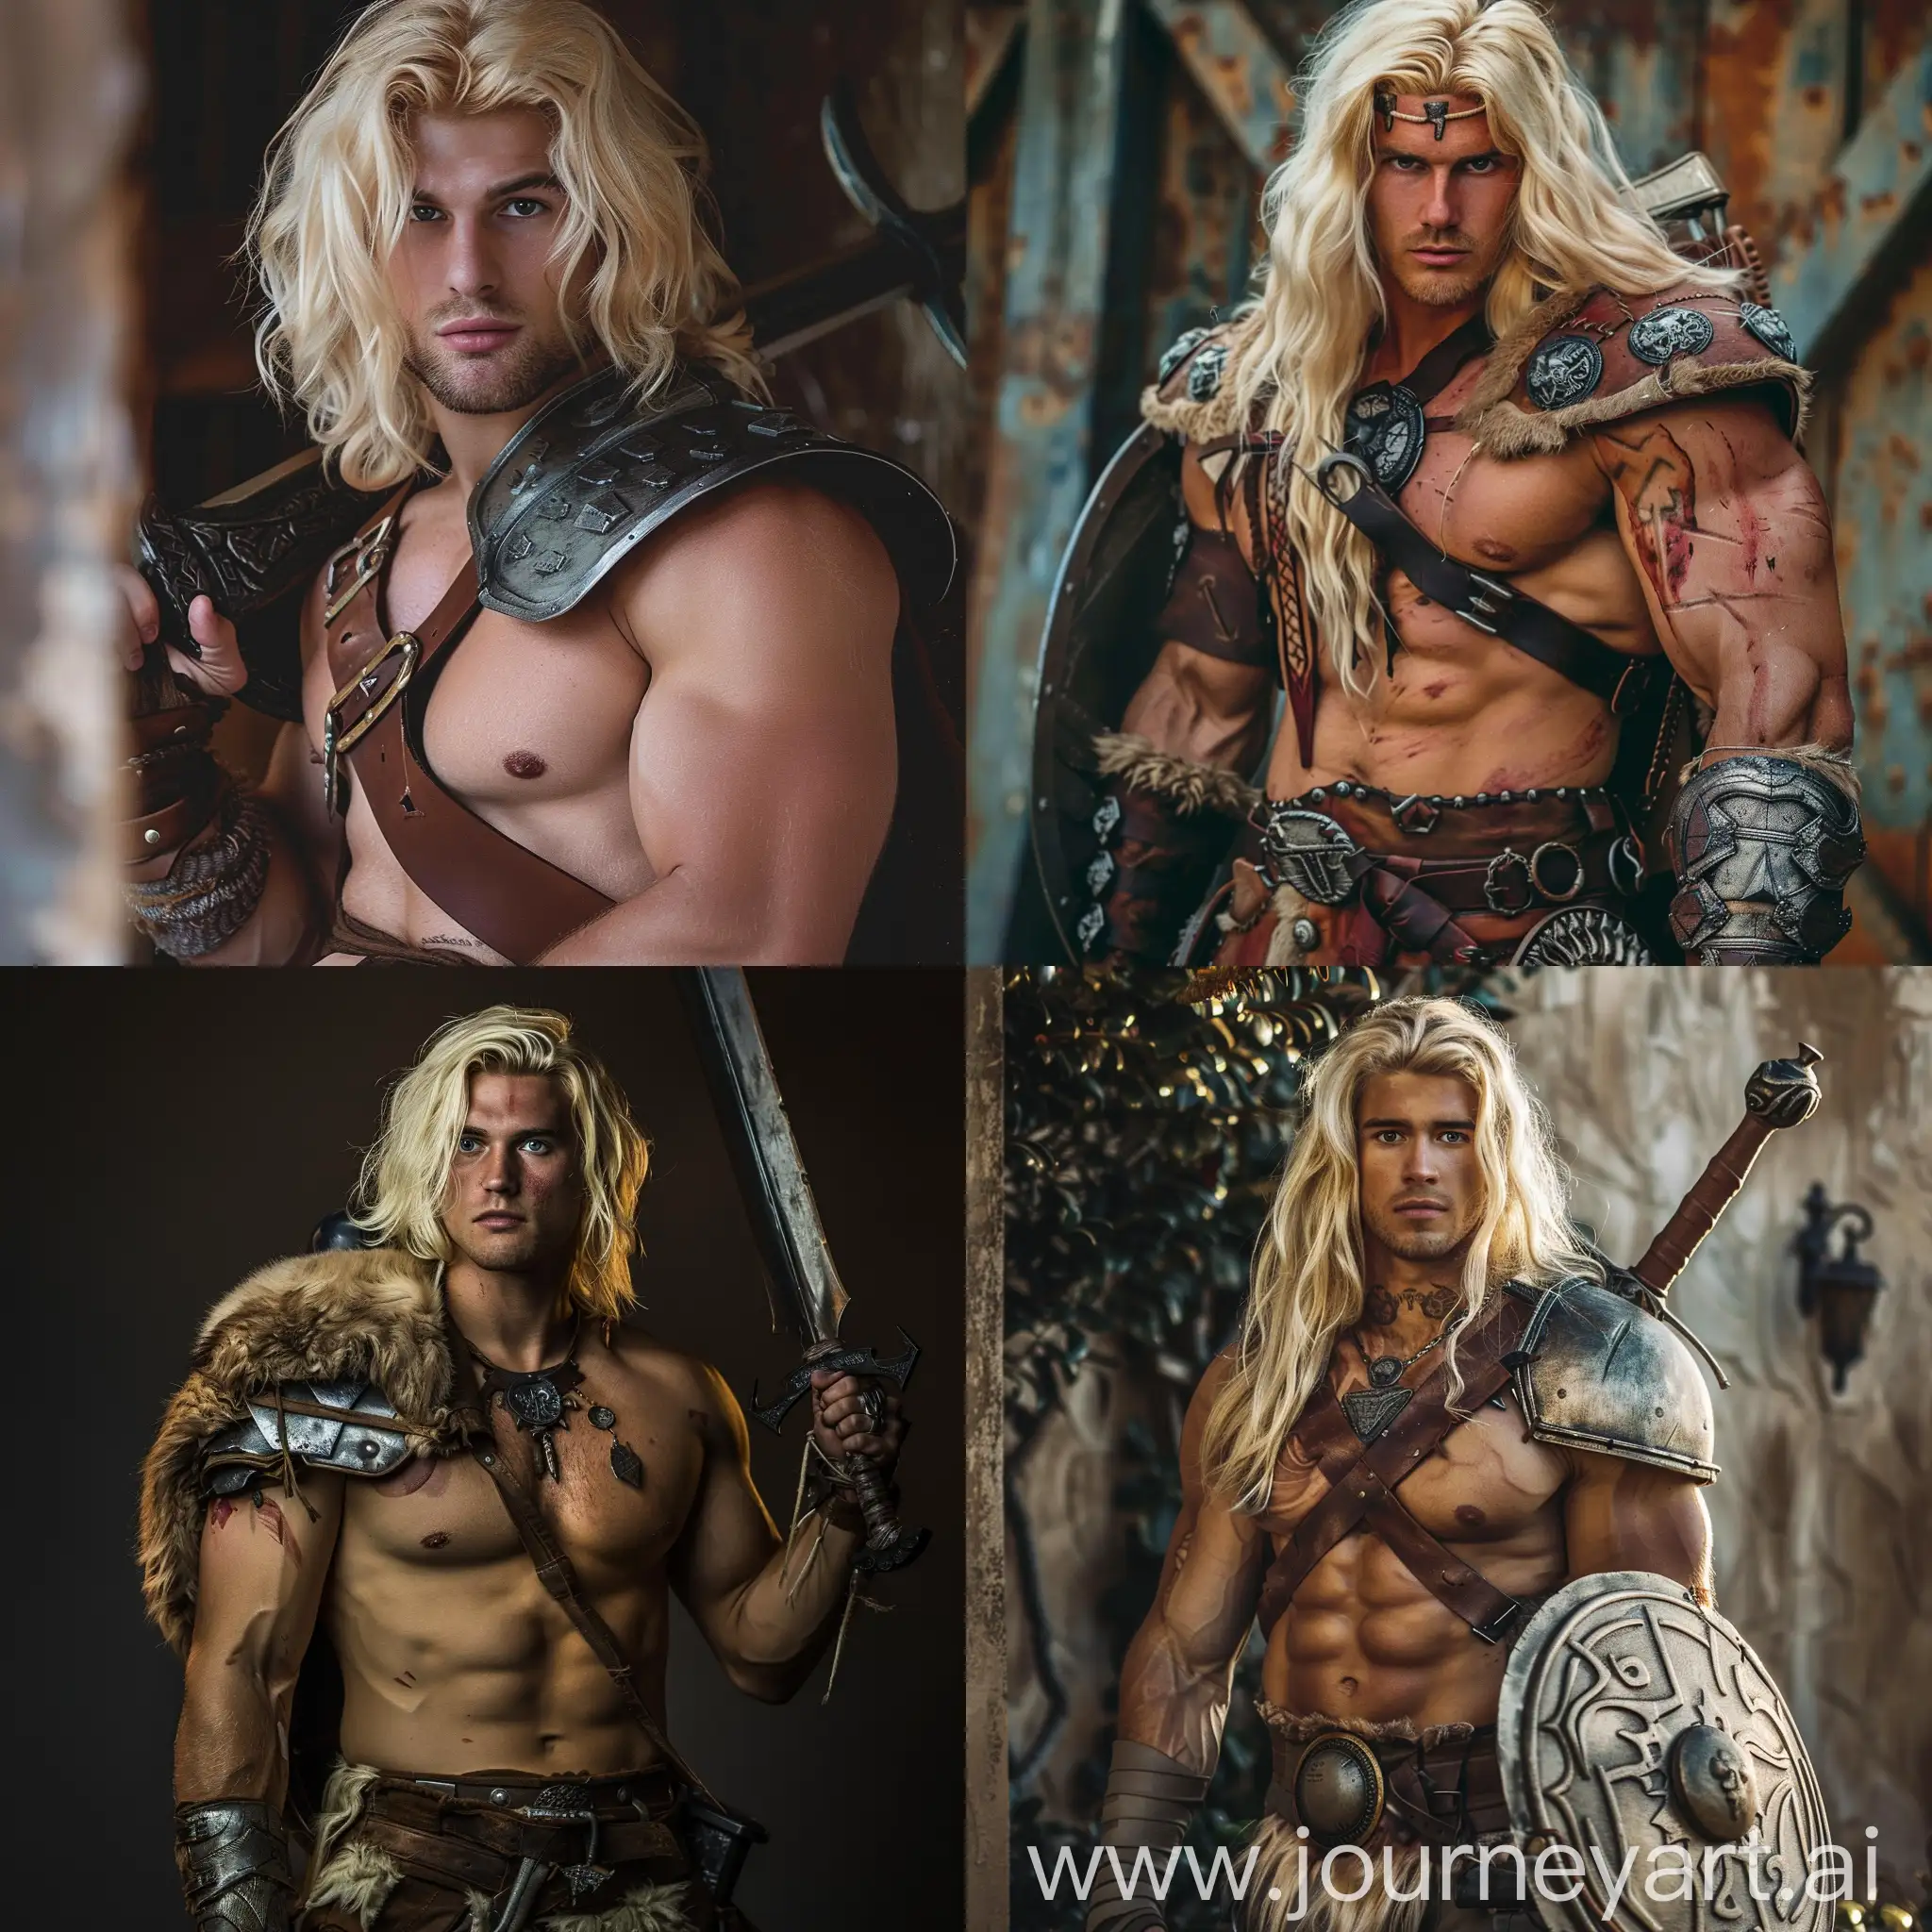 Transformation-of-a-Blond-College-Nerd-into-Barbarian-Dungeons-and-Dragons-Character